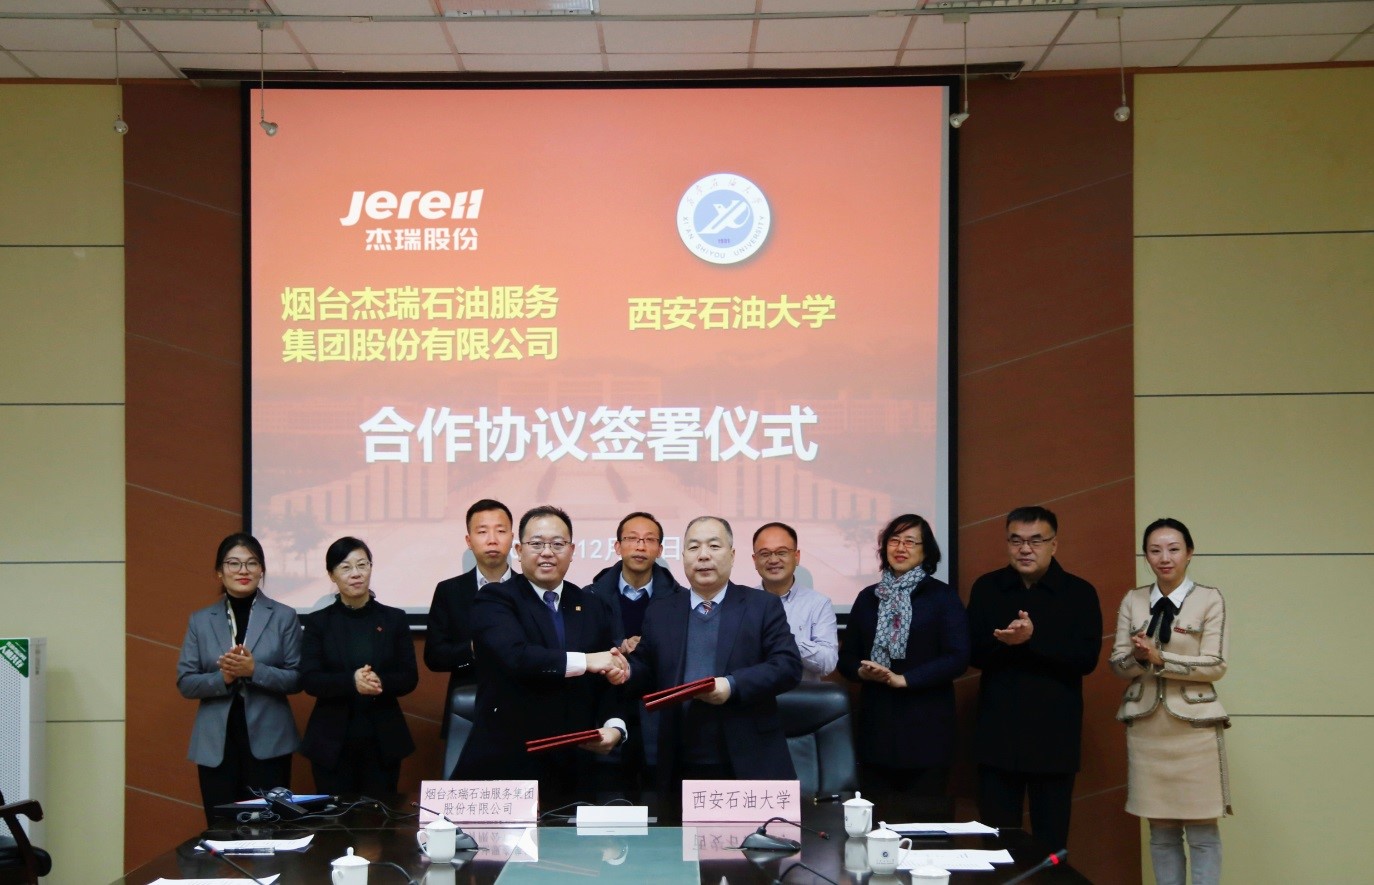 The 7th Jereh Cup Energy Equipment Innovative Design Competition for China Postgraduate held in Xi’an